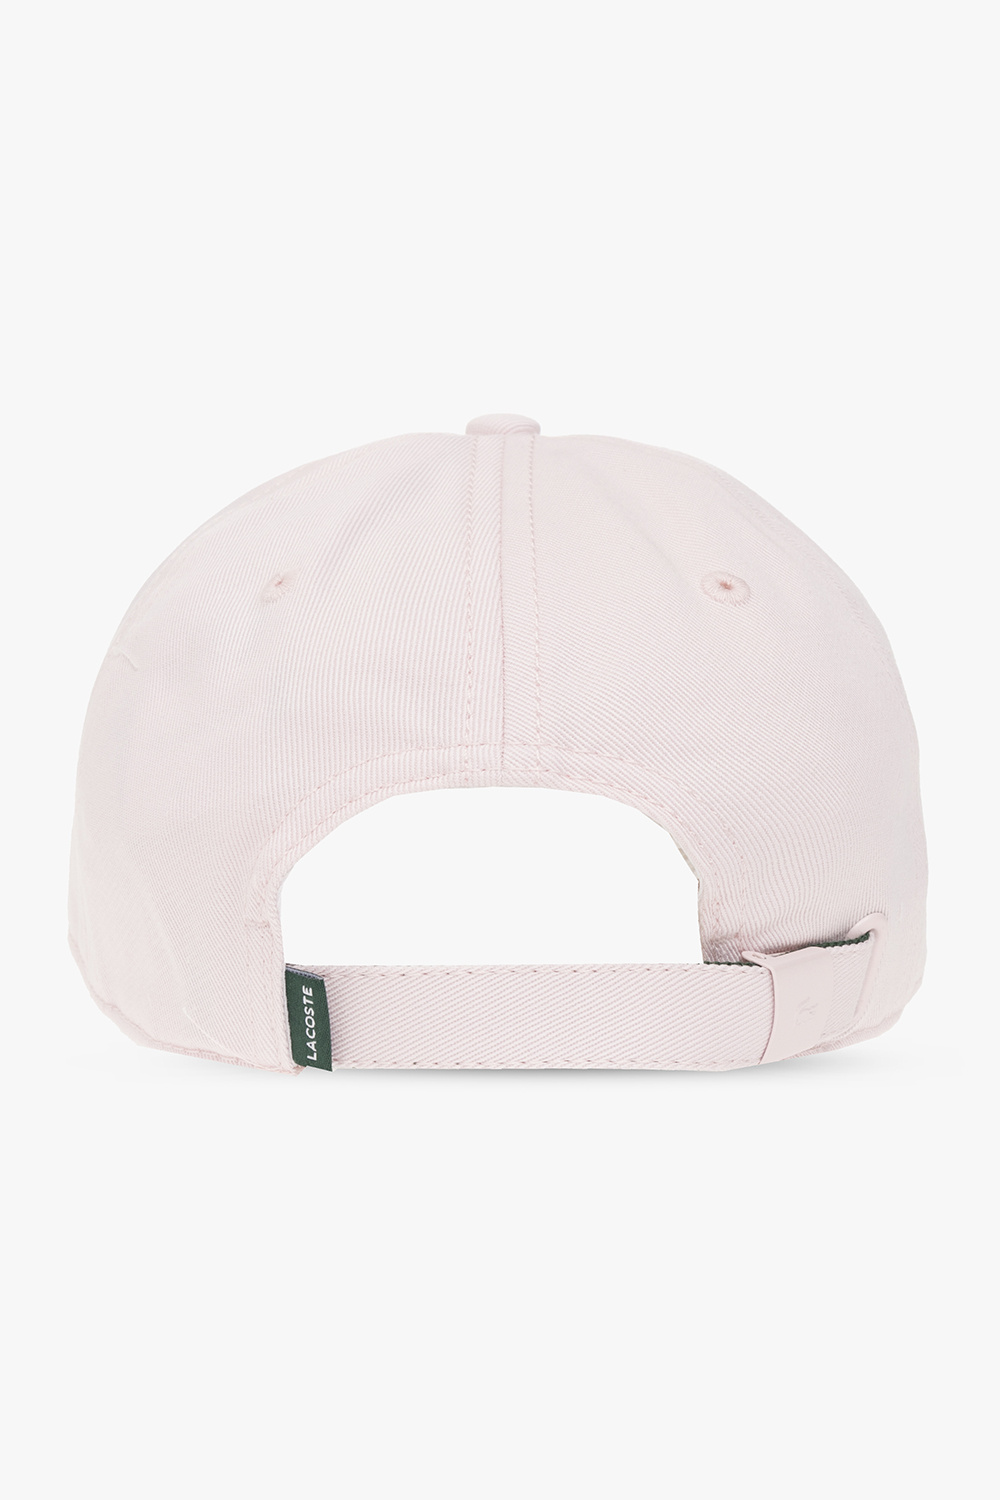 IetpShops Japan with Pink Cap atmos Serve - and new Lacoste collection collaborated on - a Lacoste logo with Serve